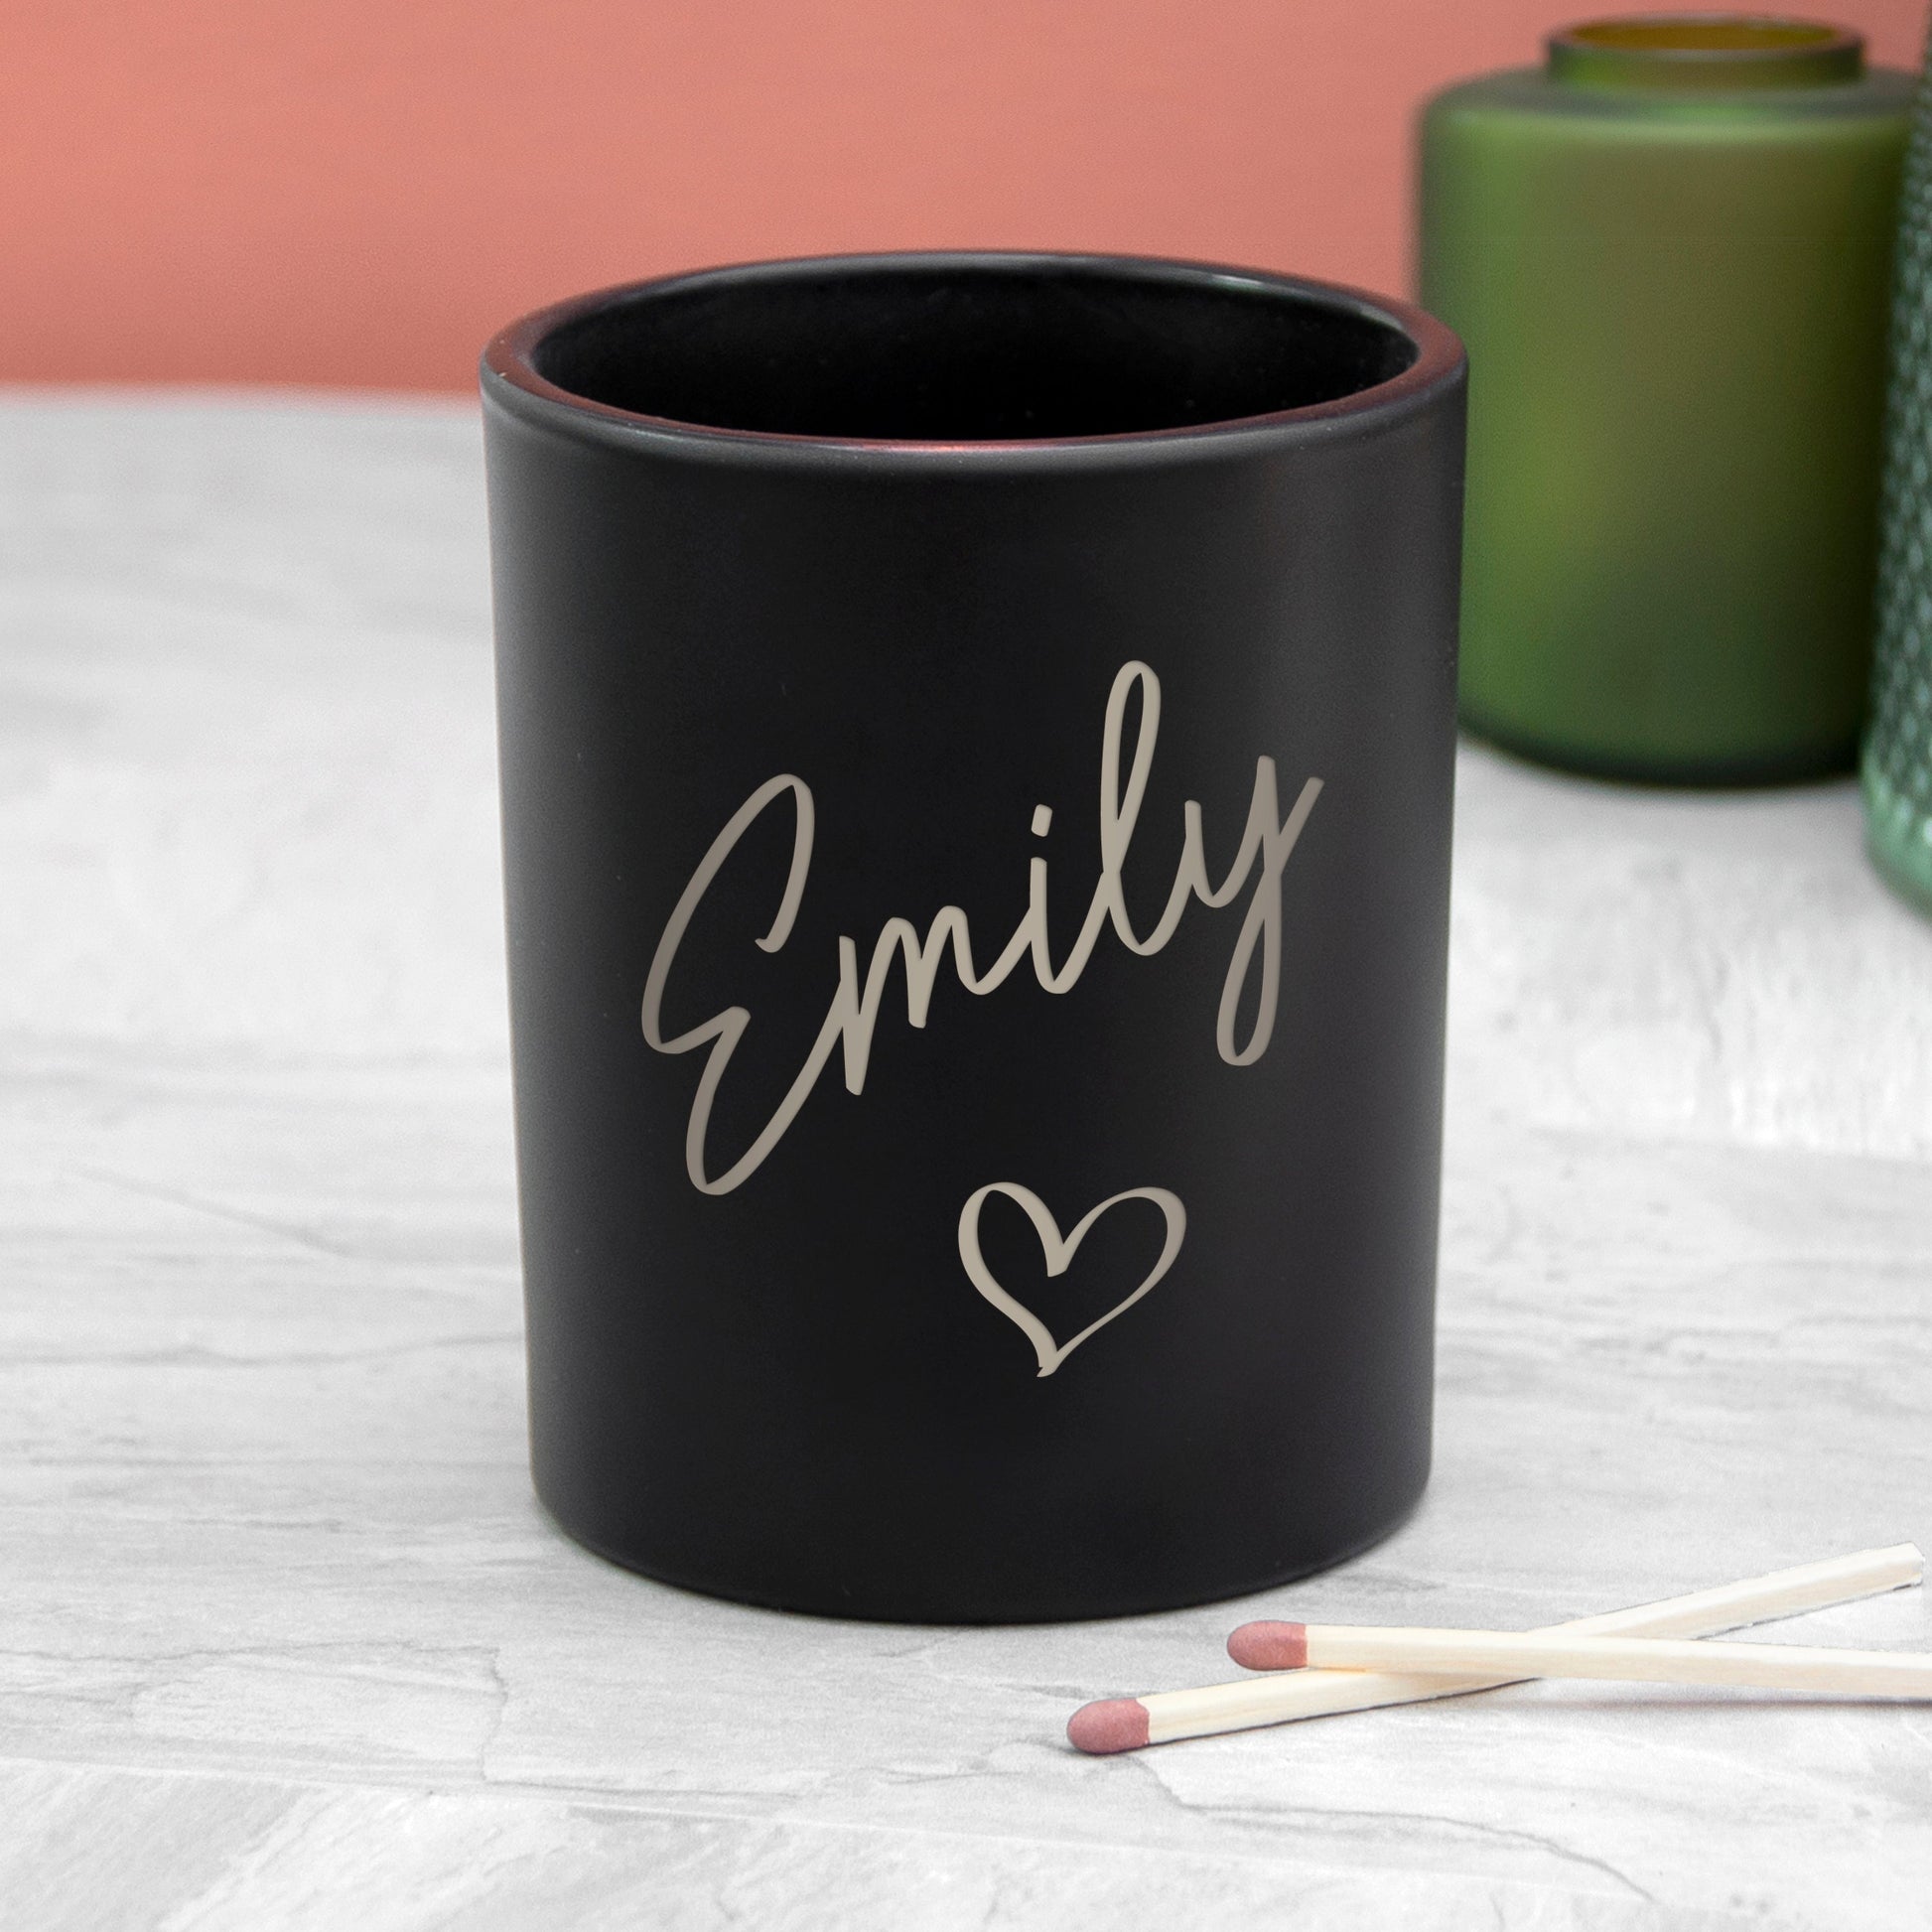 Personalized Candle Holders - Personalized Heart Candle Holder 